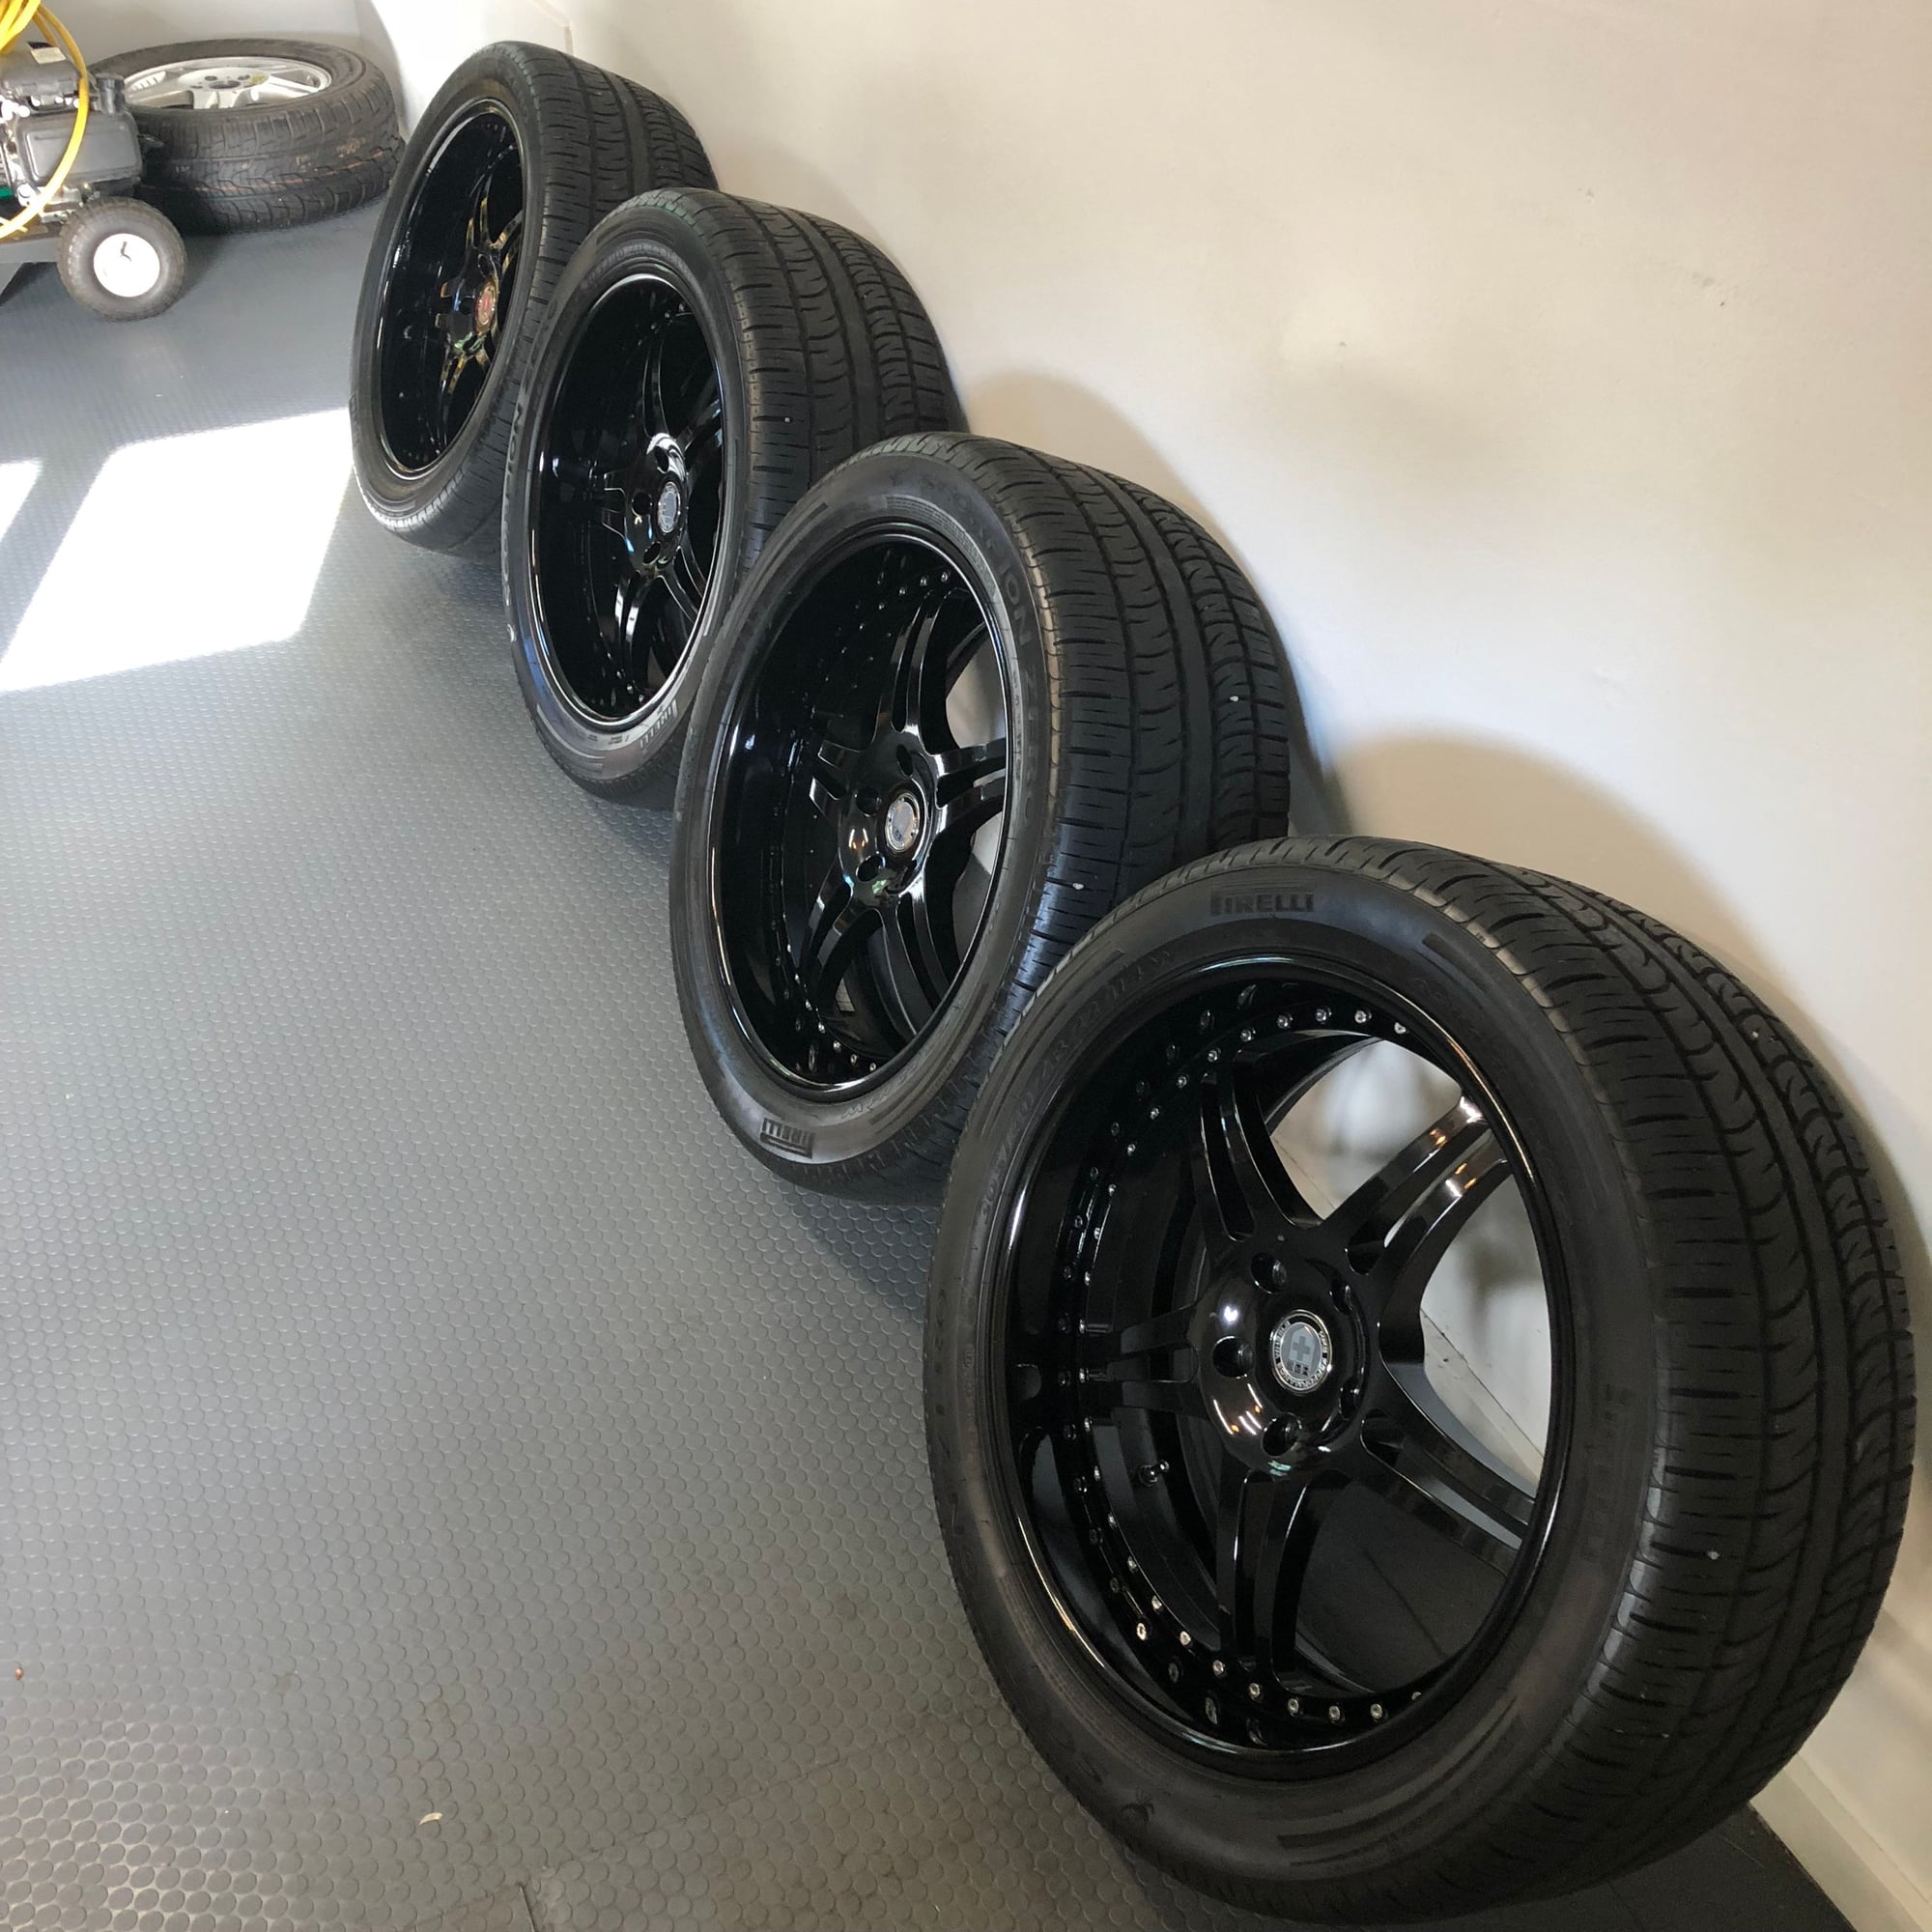 Wheels and Tires/Axles - HRE 547r 22 inch 3 piece with new Pirellis - Used - 2003 to 2019 Mercedes-Benz G55 AMG - Longmeadow, MA 01106, United States